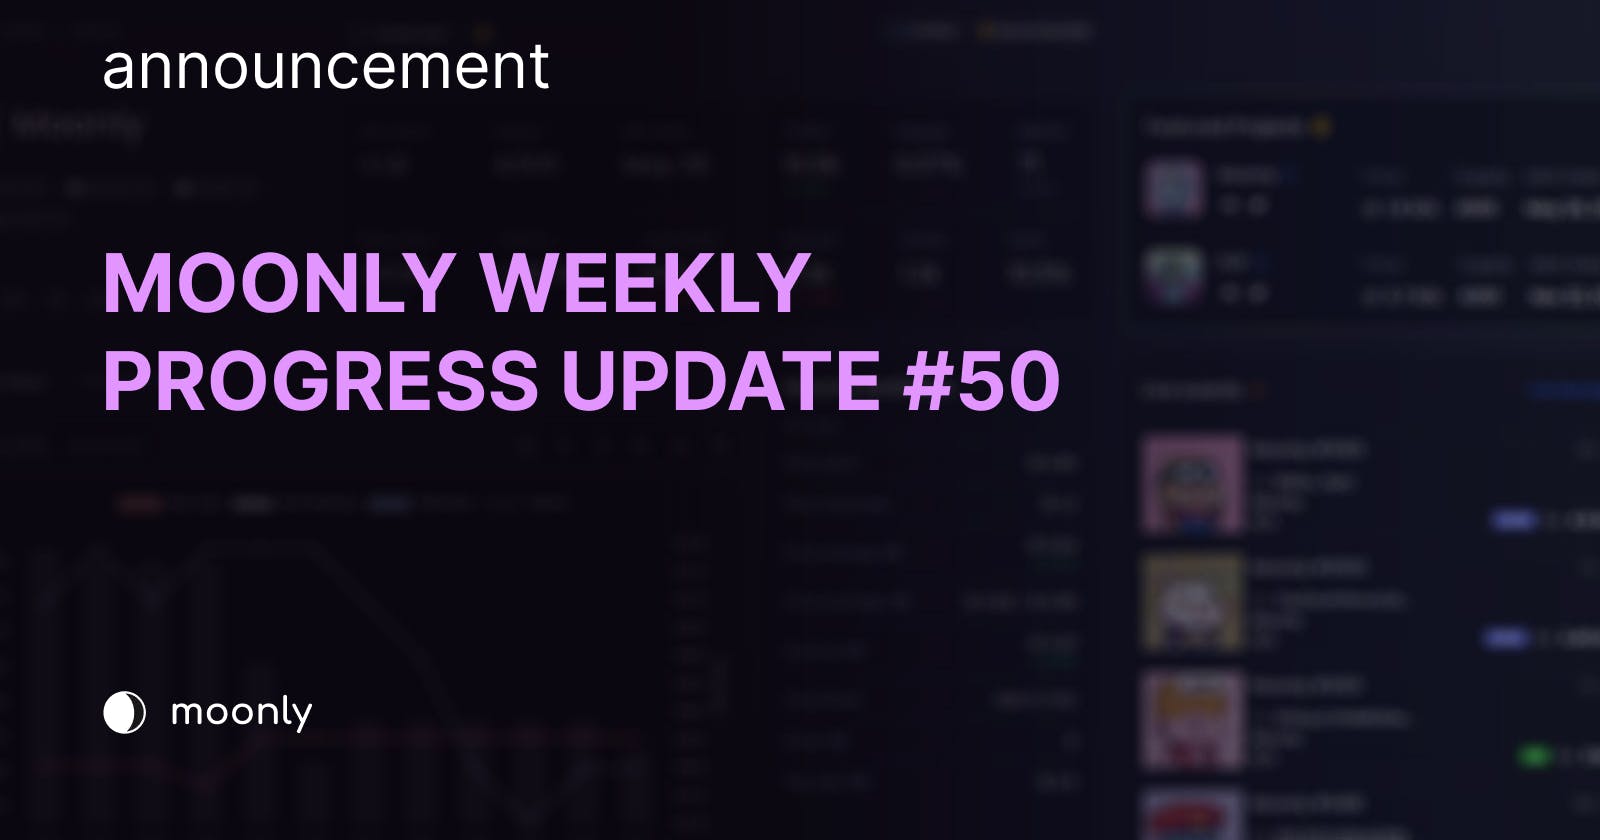 Moonly weekly progress update #50 - Getting closer to a Sniper tool